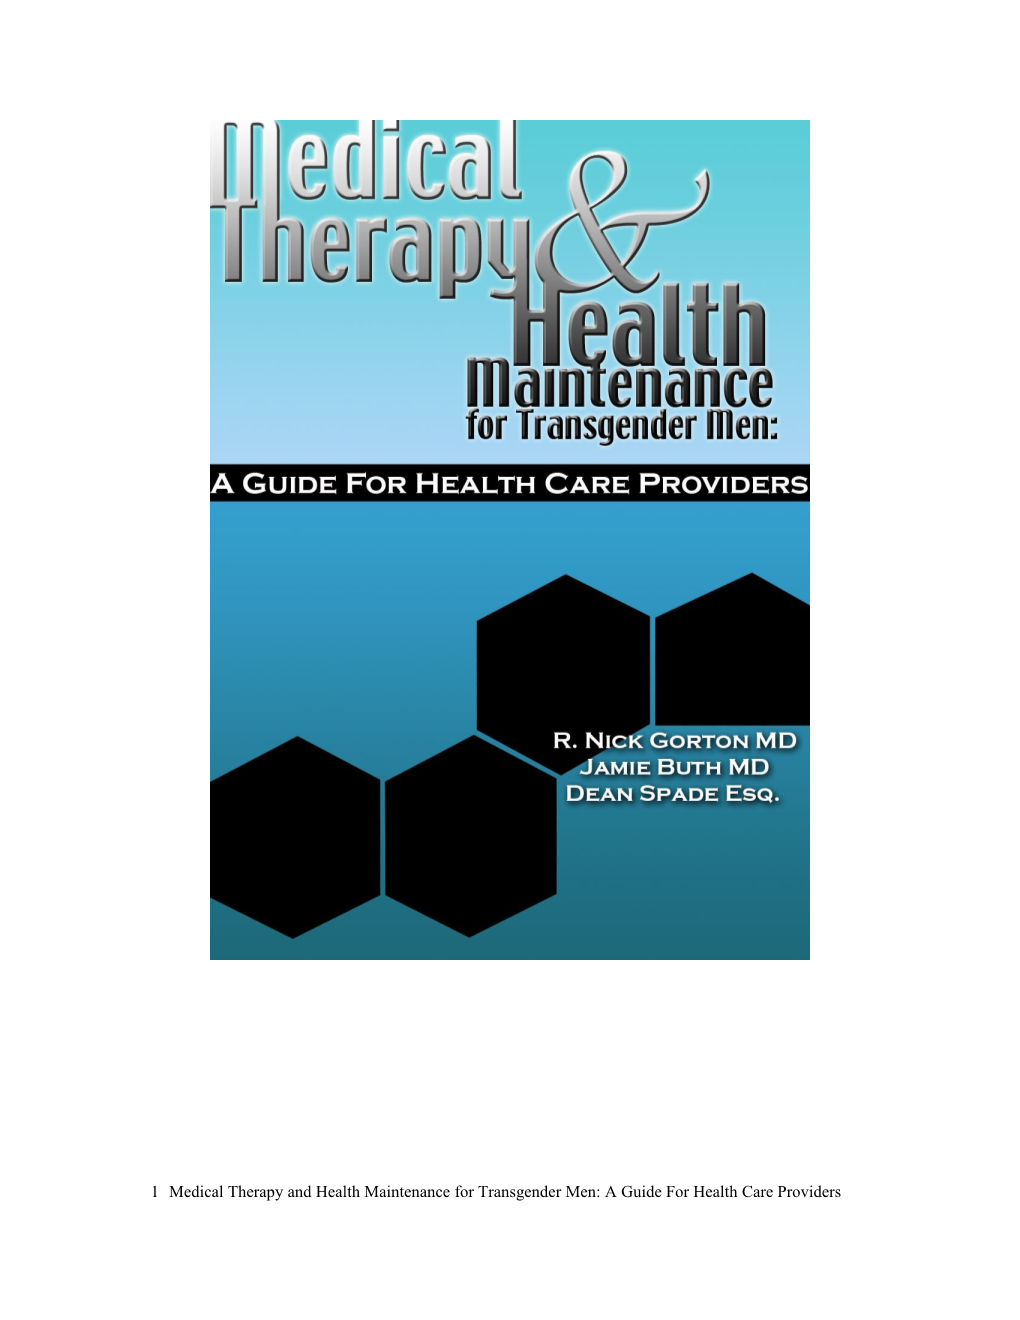 Medical Therapy and Health Maintenance for Transgender Men: a Guide for Health Care Providers